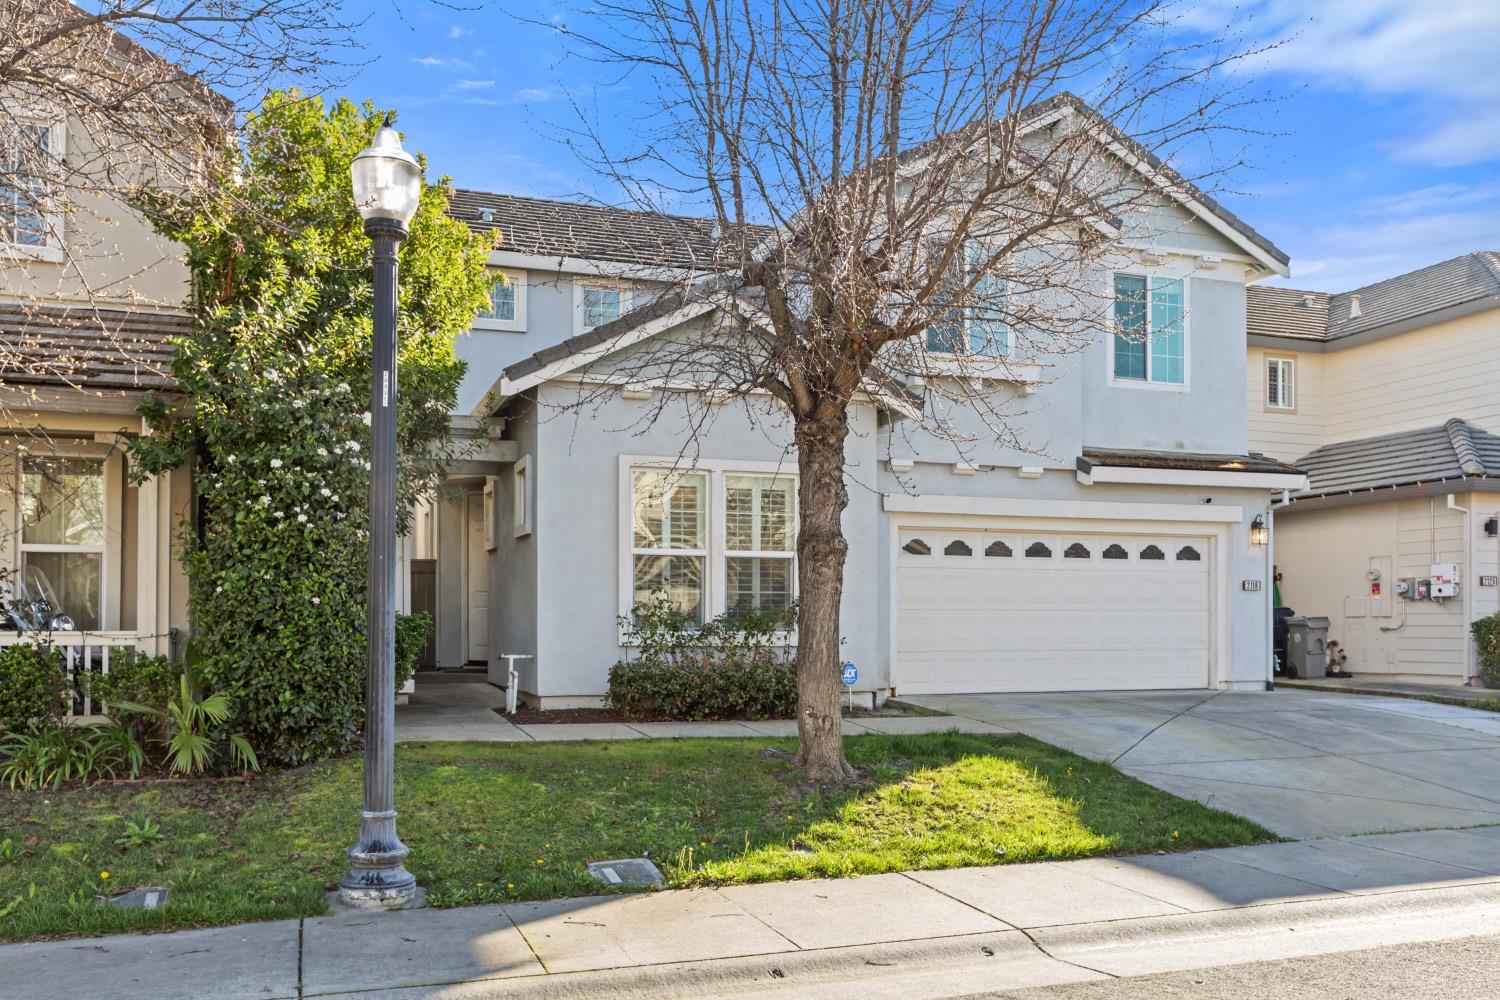 Photo of 2118 Promise Wy in Sacramento, CA